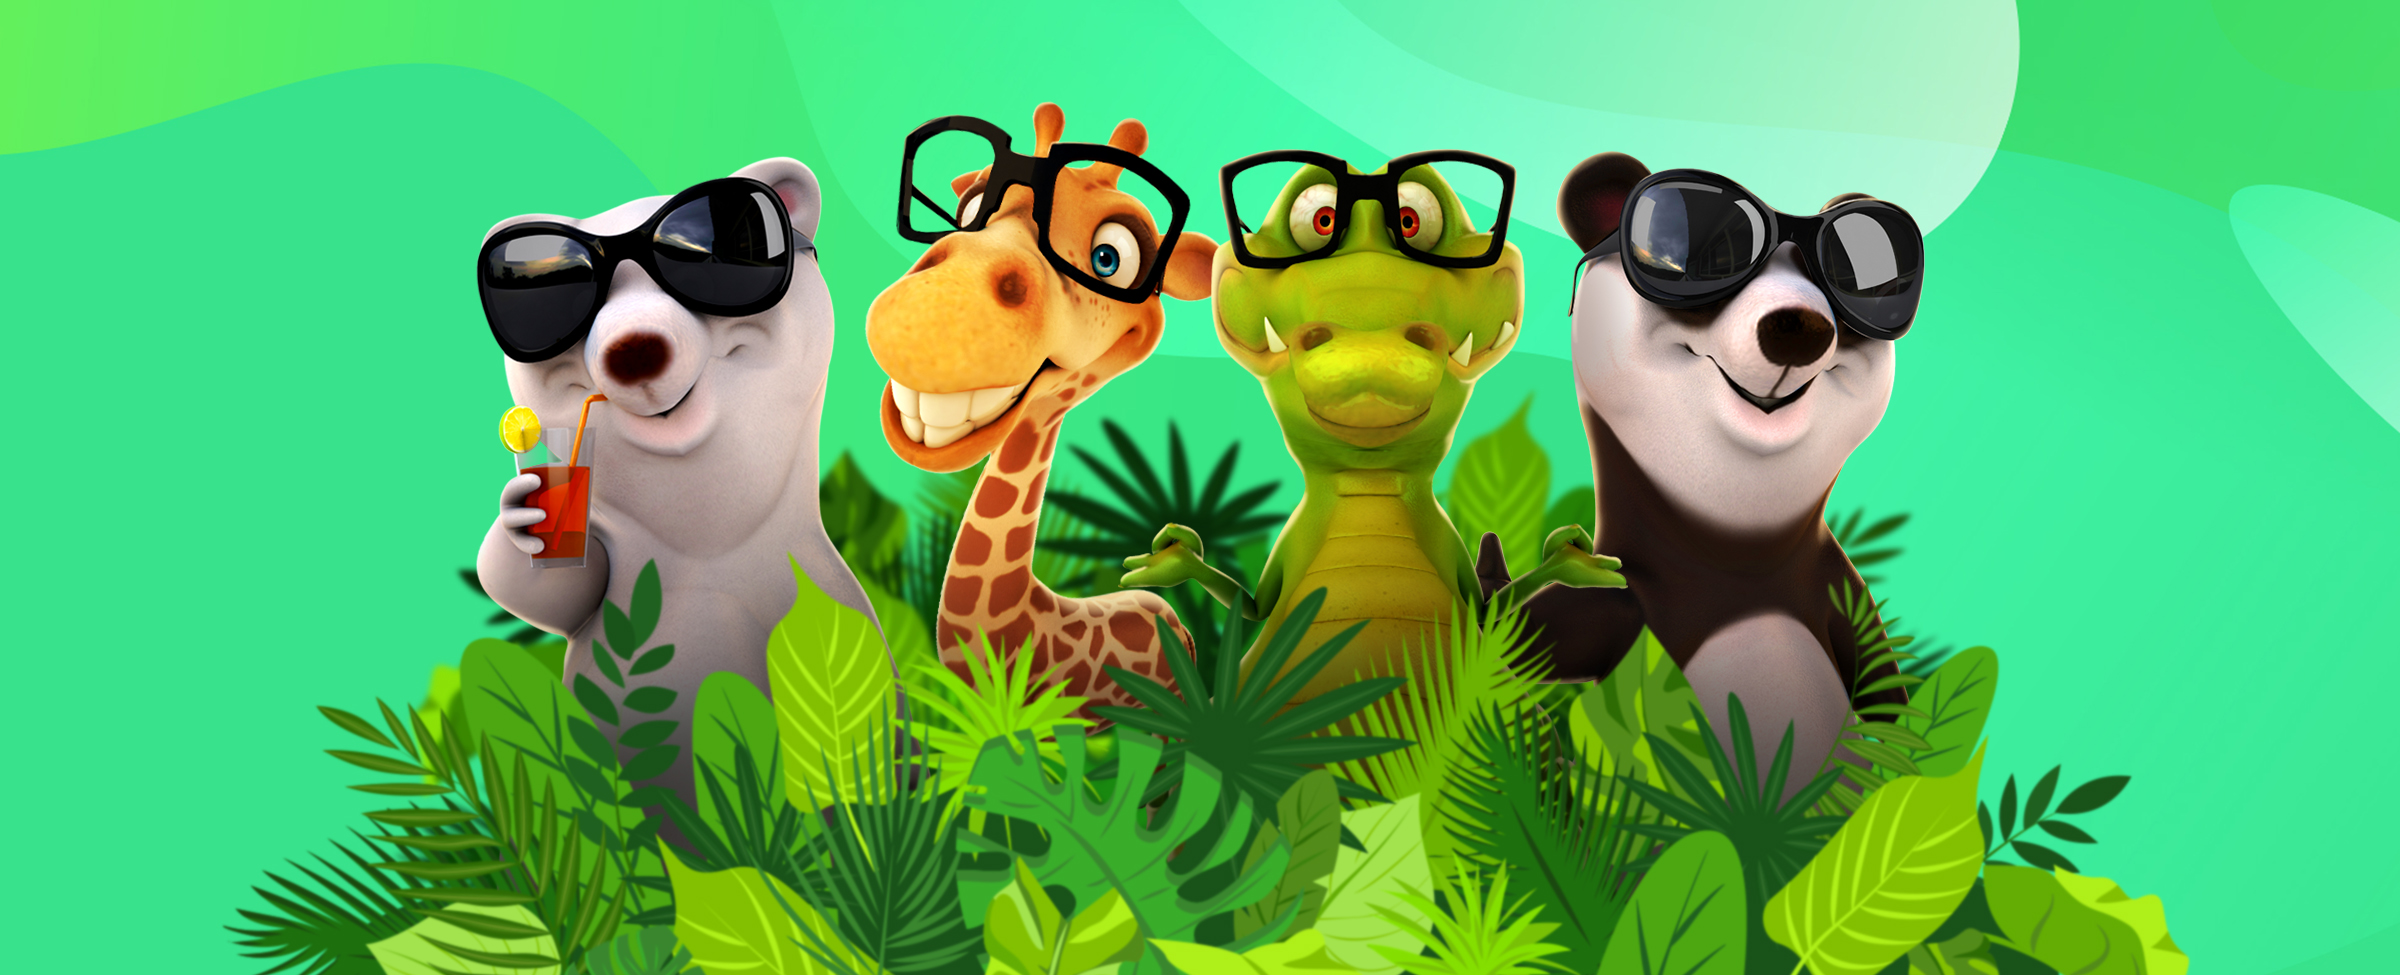 An assortment of cartoon animal characters from the SlotsLV slot game Animal Wilds featuring pandas, an alligator and giraffe, all wearing glasses and standing amidst jungle ferns